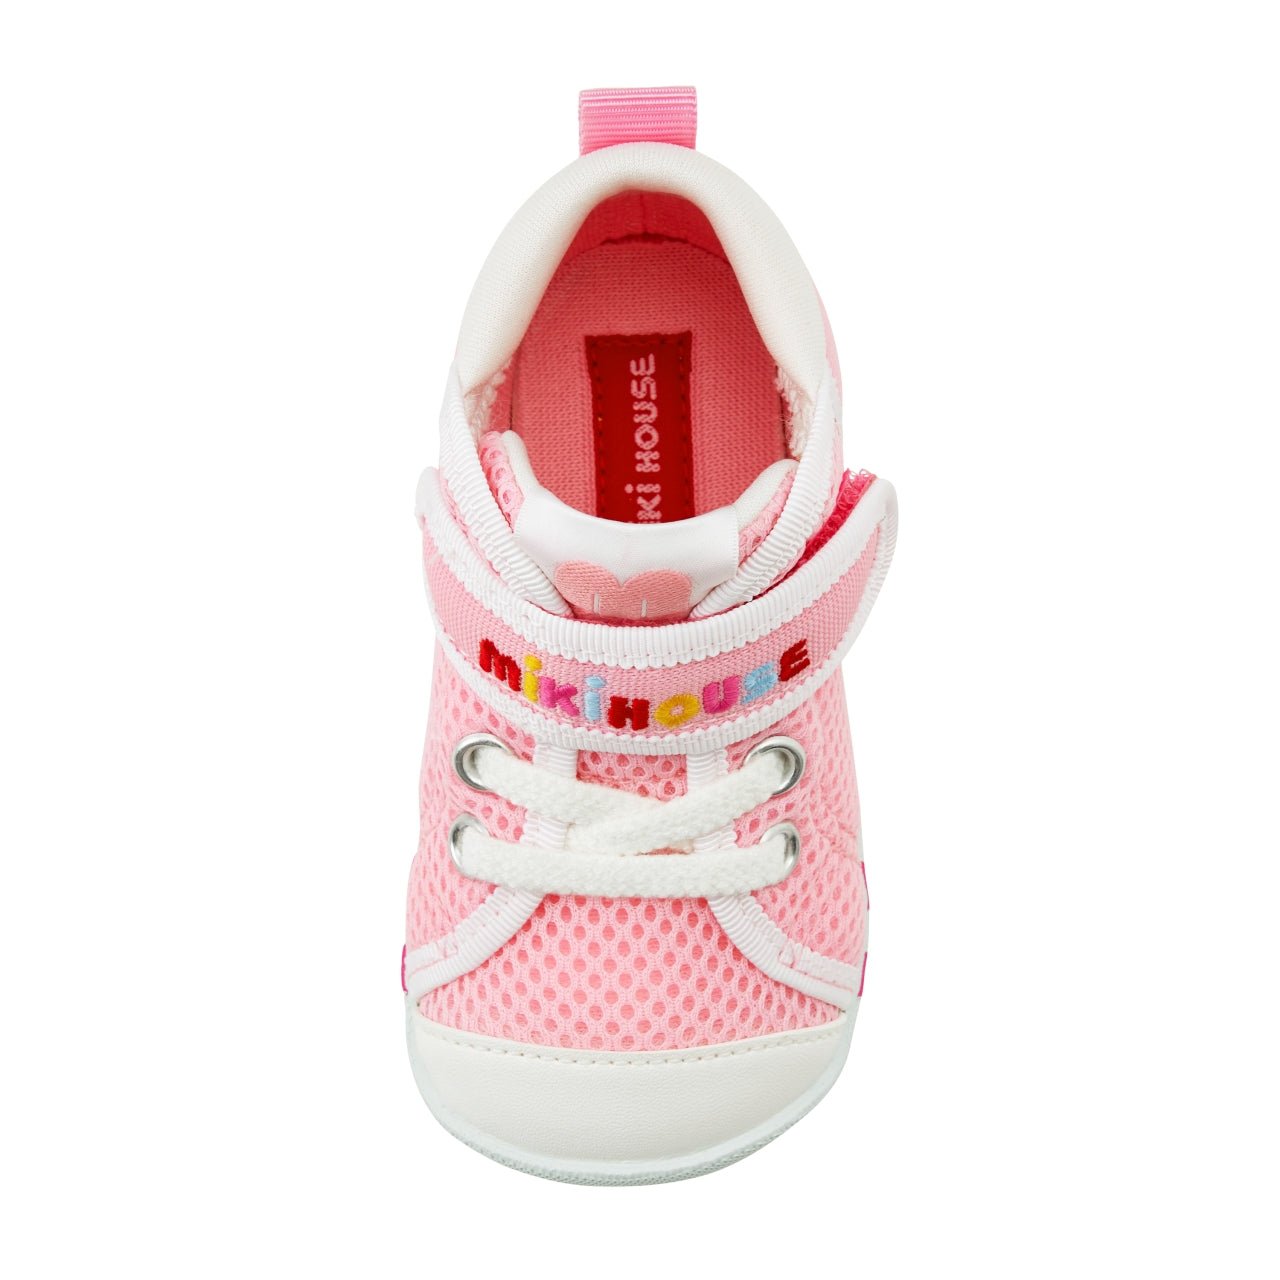 Double Russell Mesh First Walker Shoes - Strawberry Milk - MIKI HOUSE USA